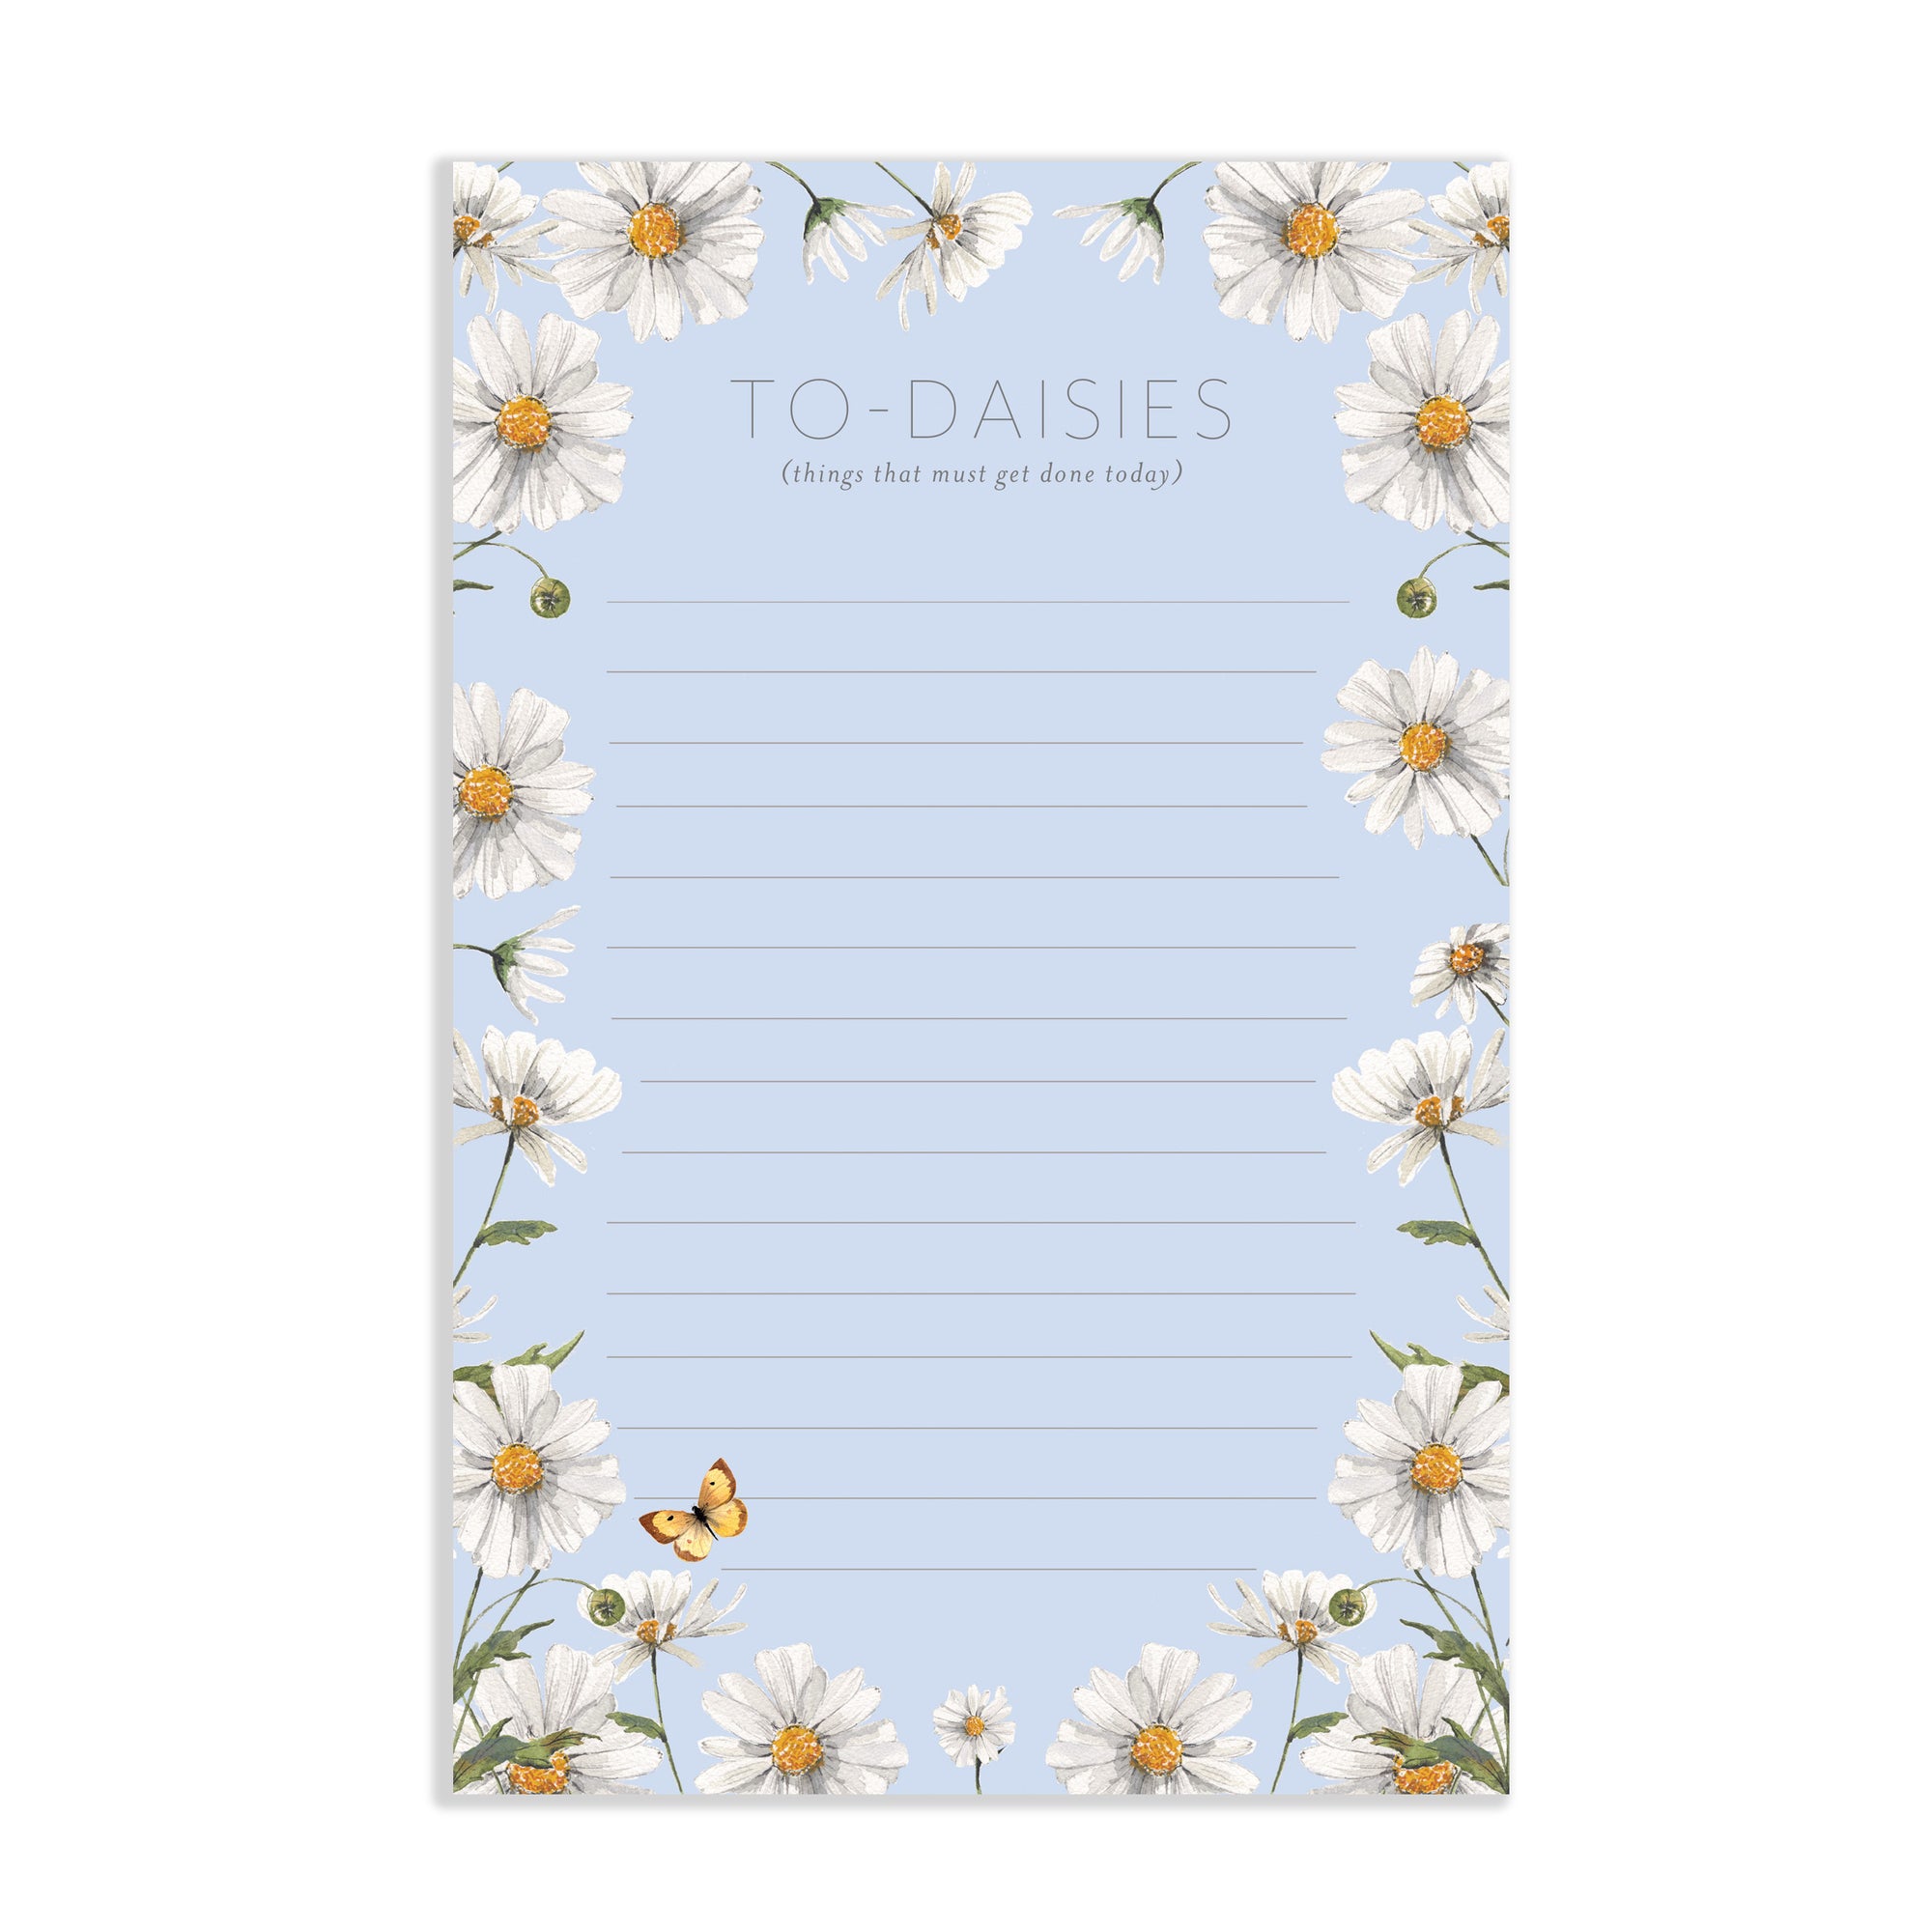 To-Daisies Notepad